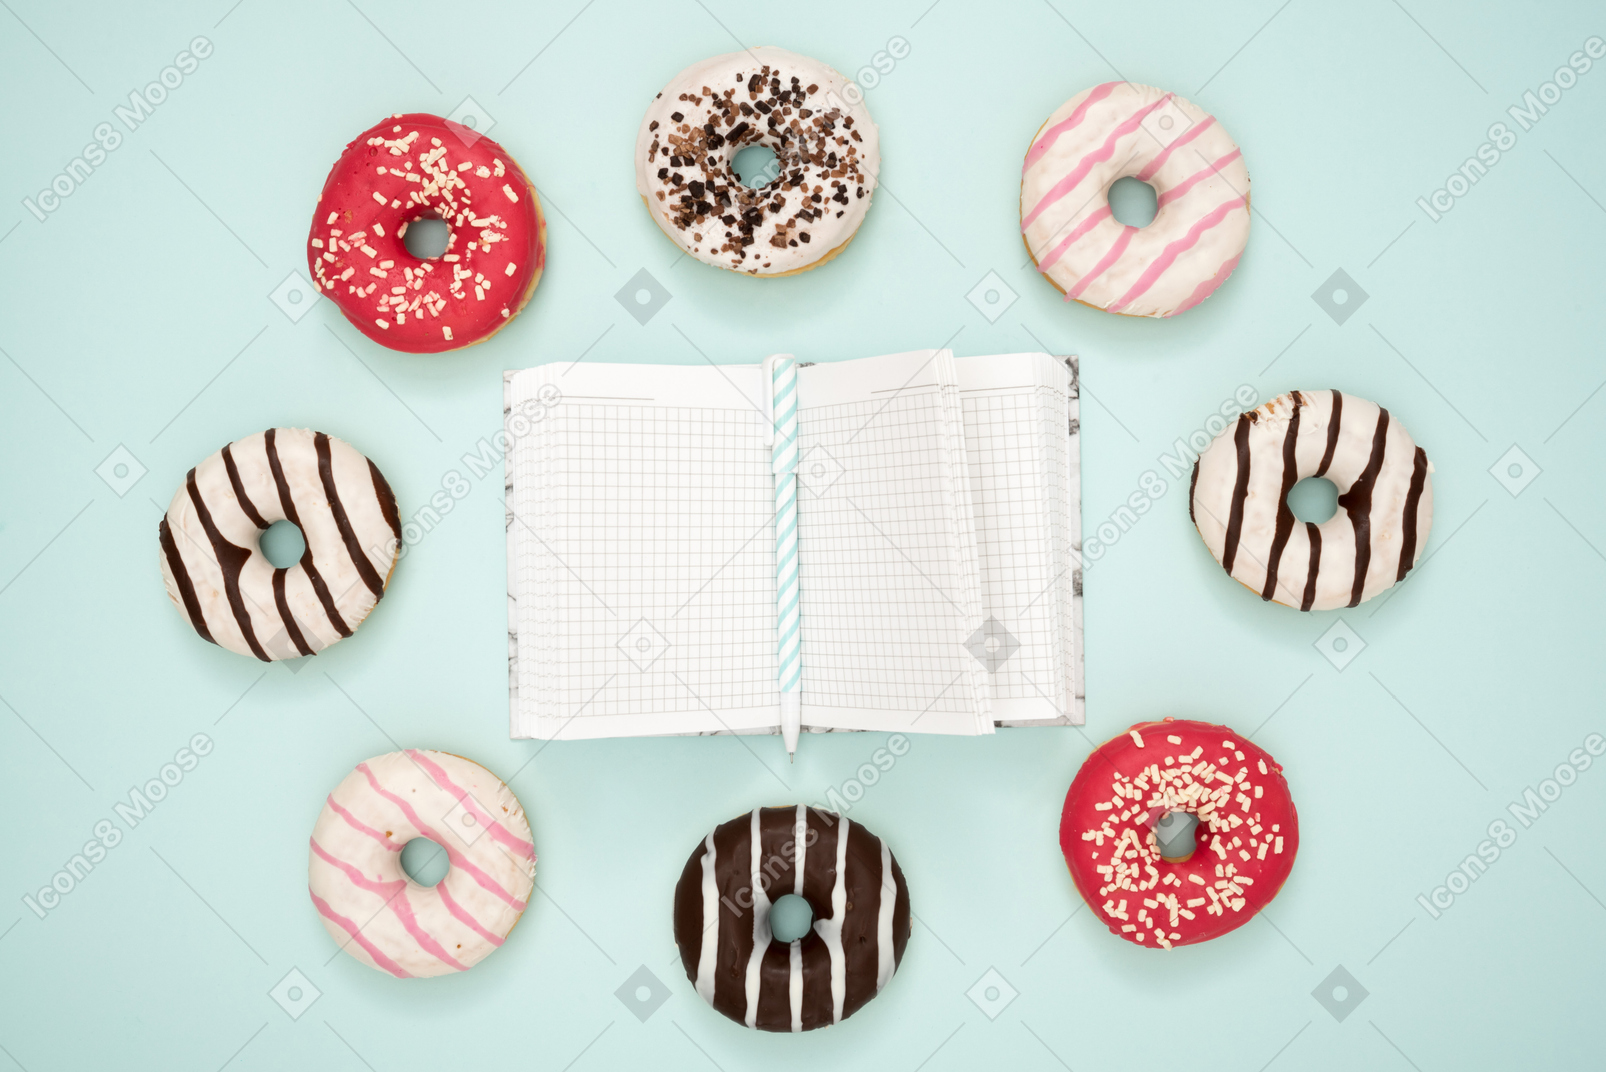 Glazing colorful donuts and a notebook with a pen